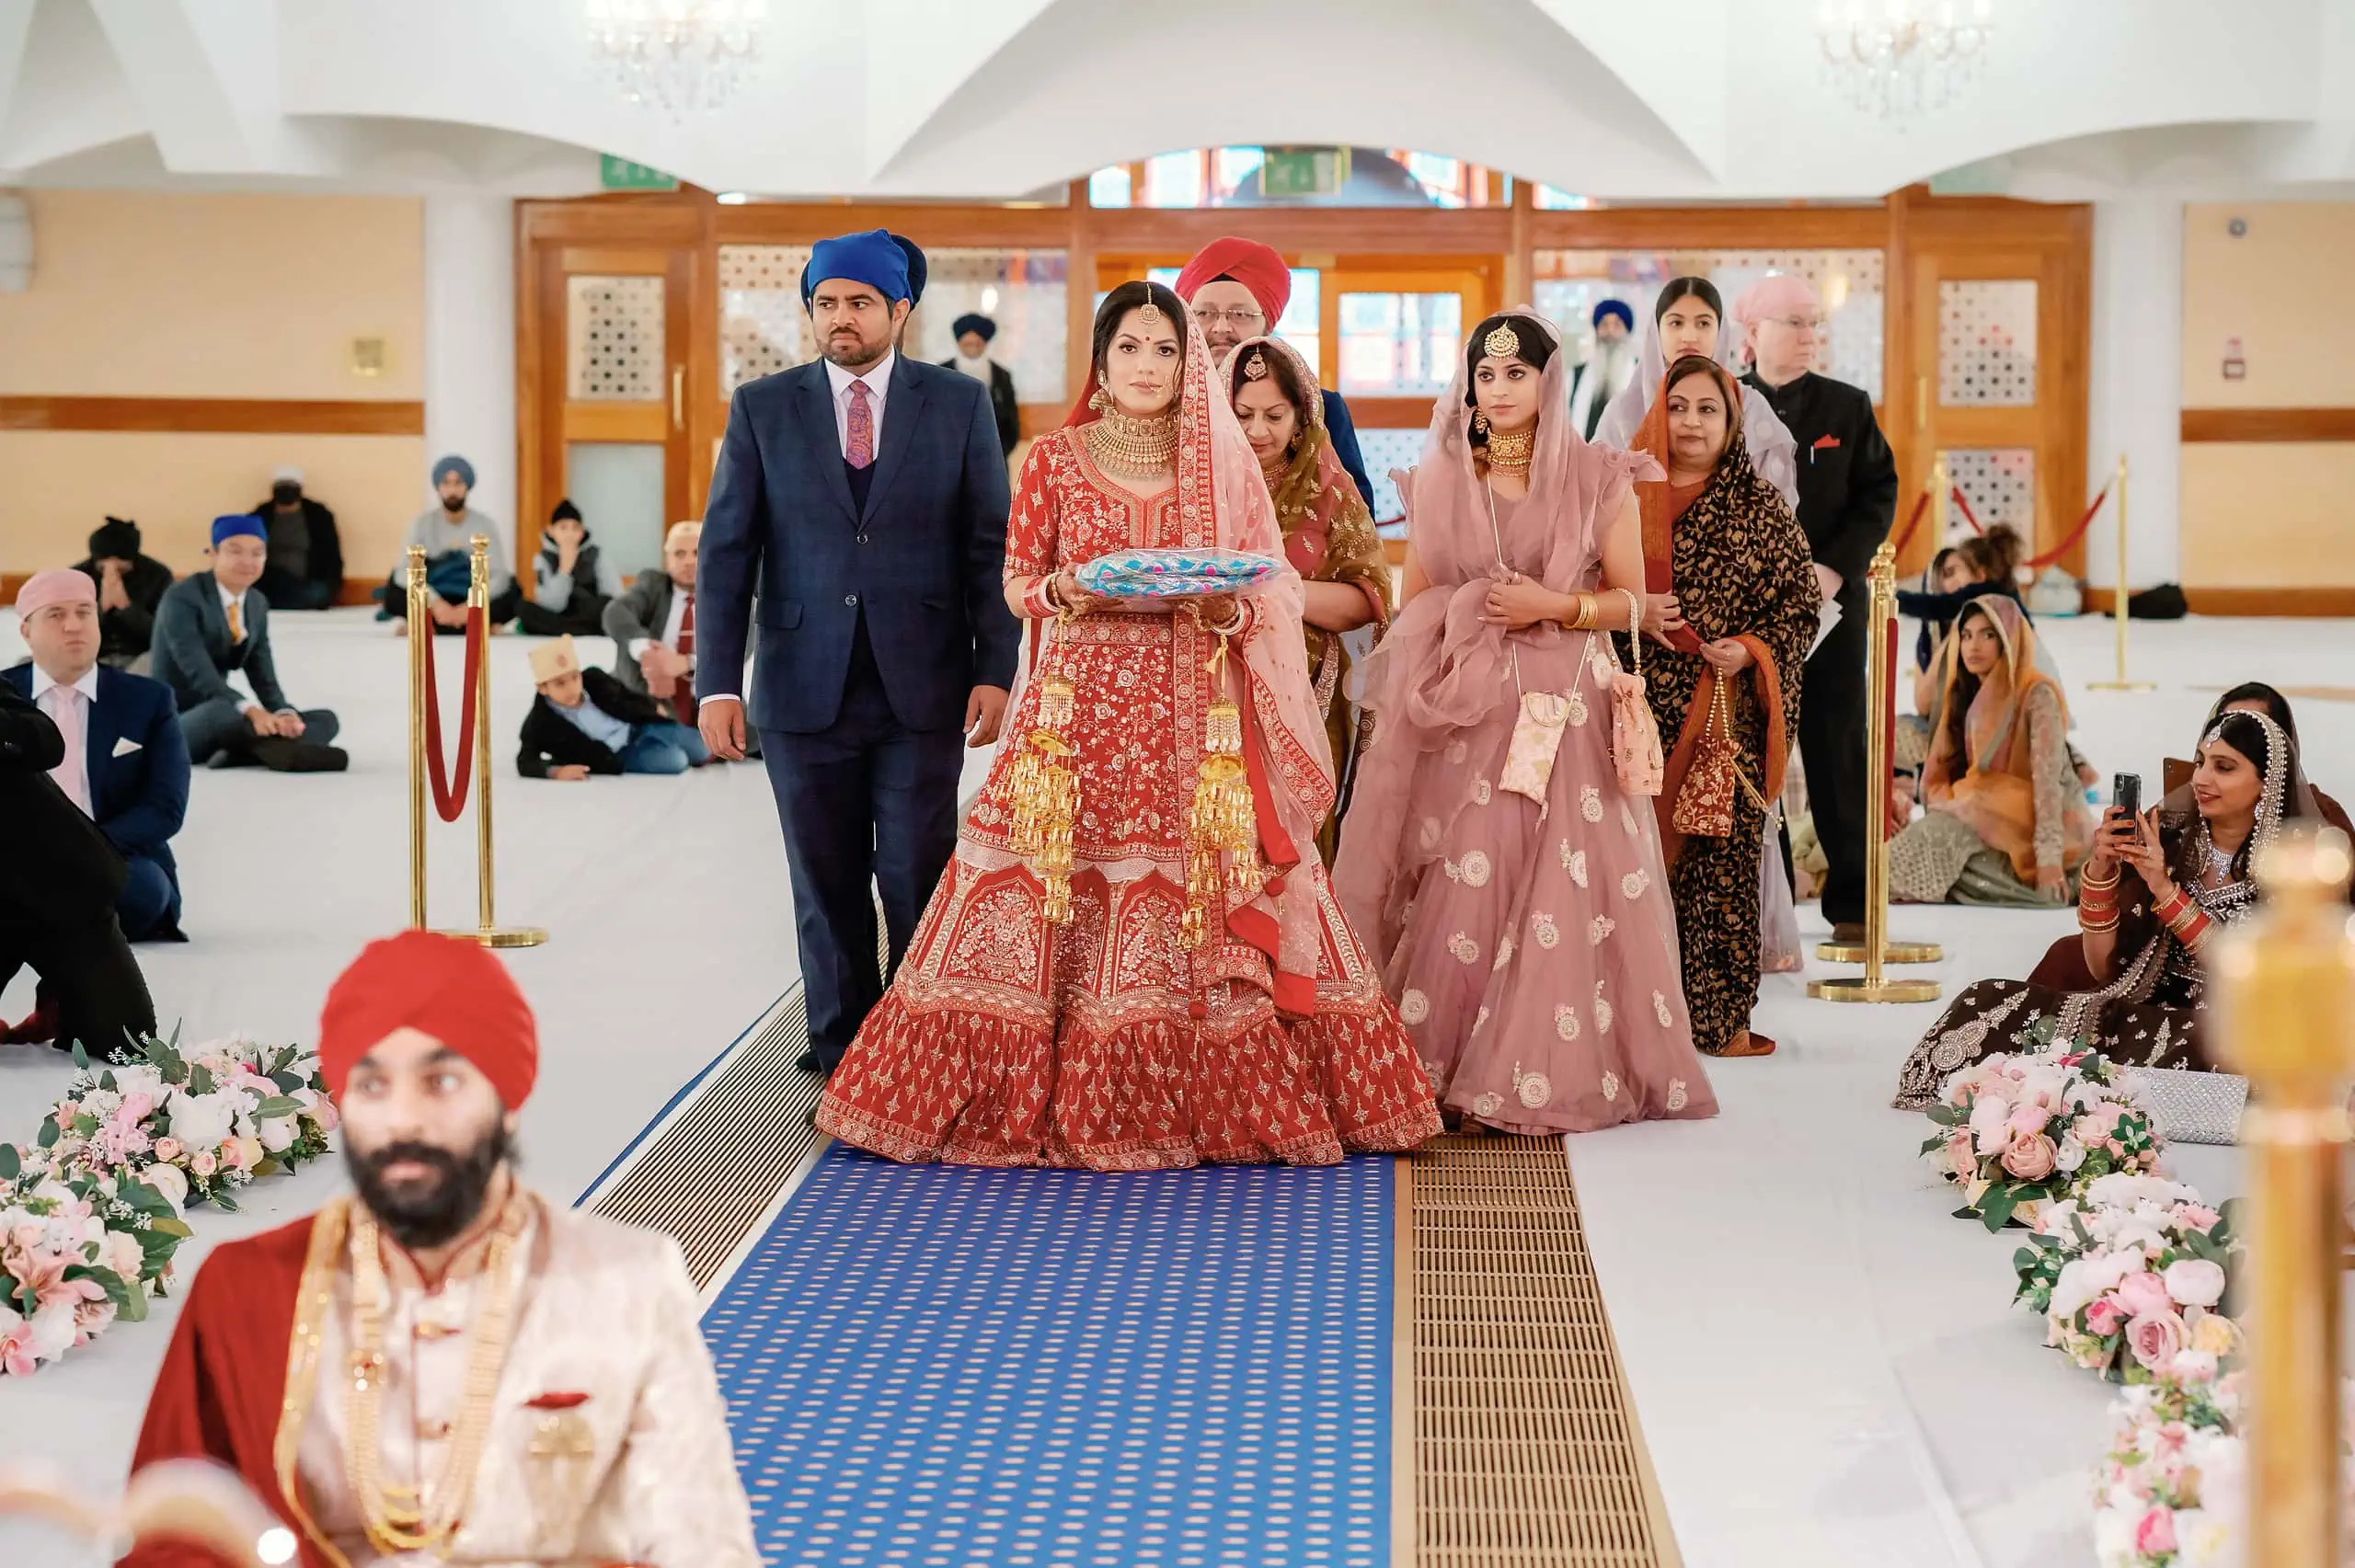 The Bride arriving for the Sikh Wedding